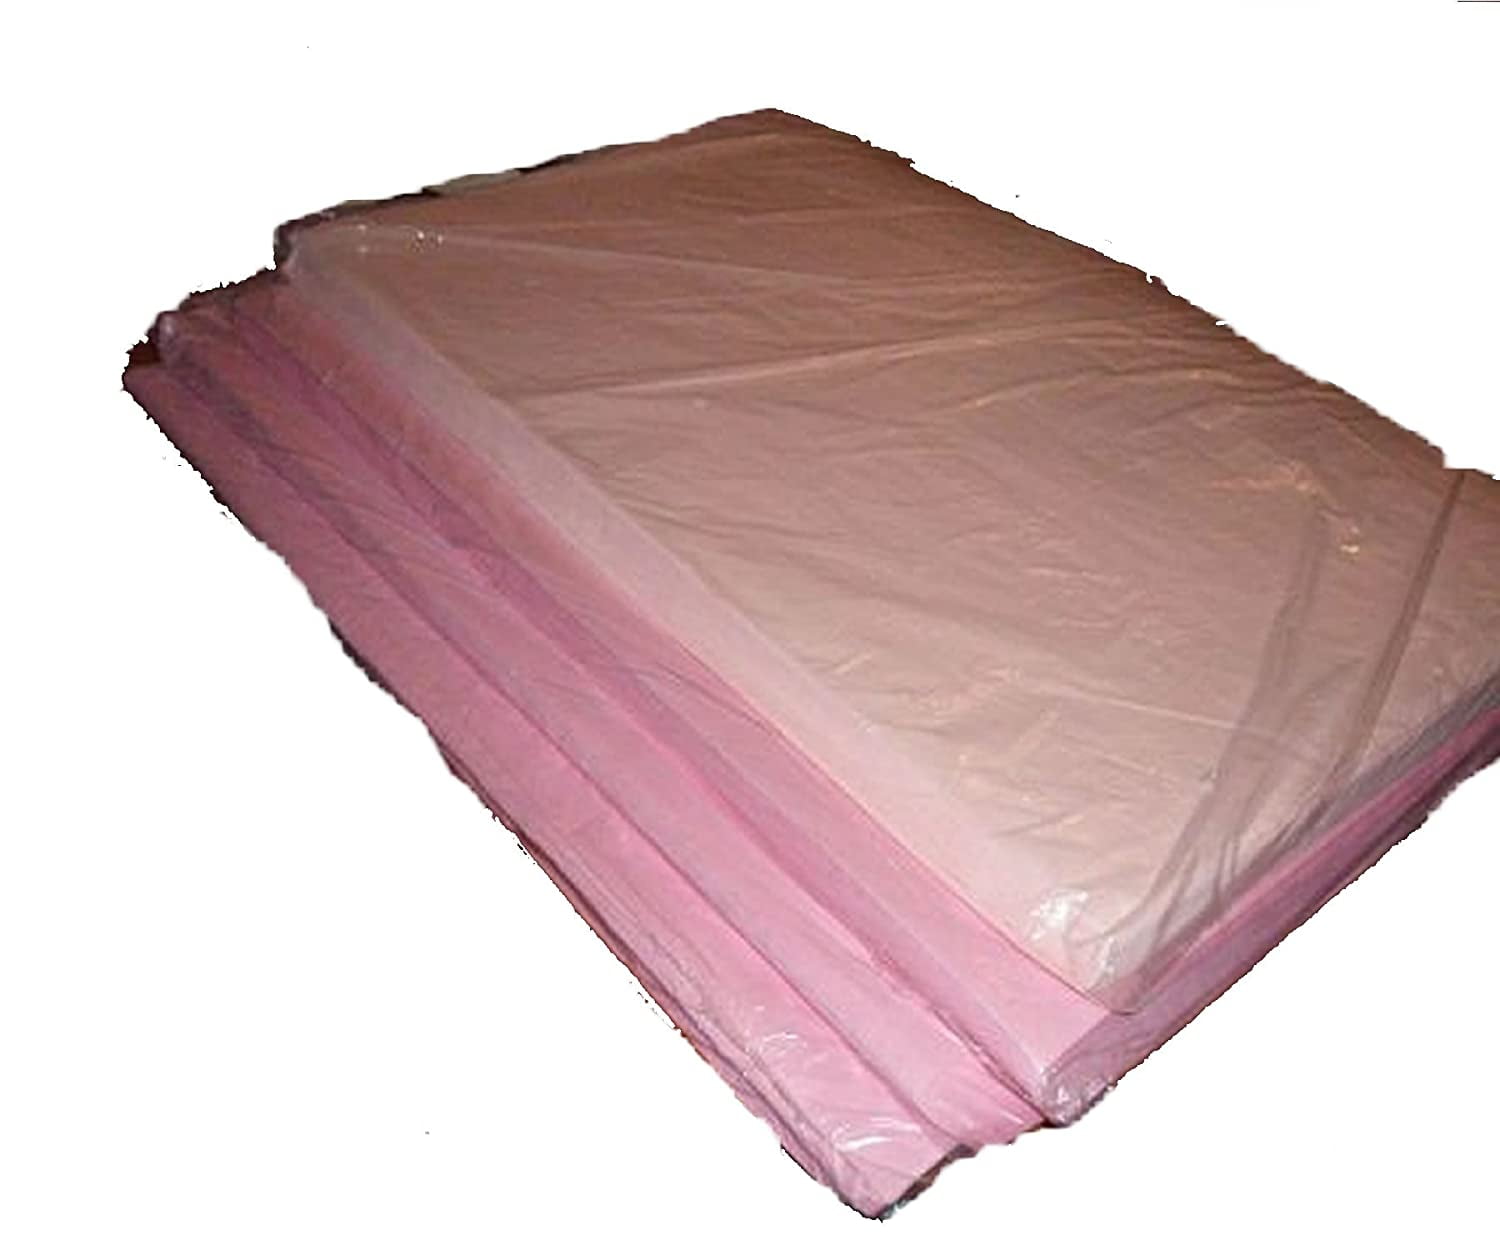 Premium Grade Tissue Paper - 8-10 reams (3,840-4,800 sheets) - Cleaner's  Supply